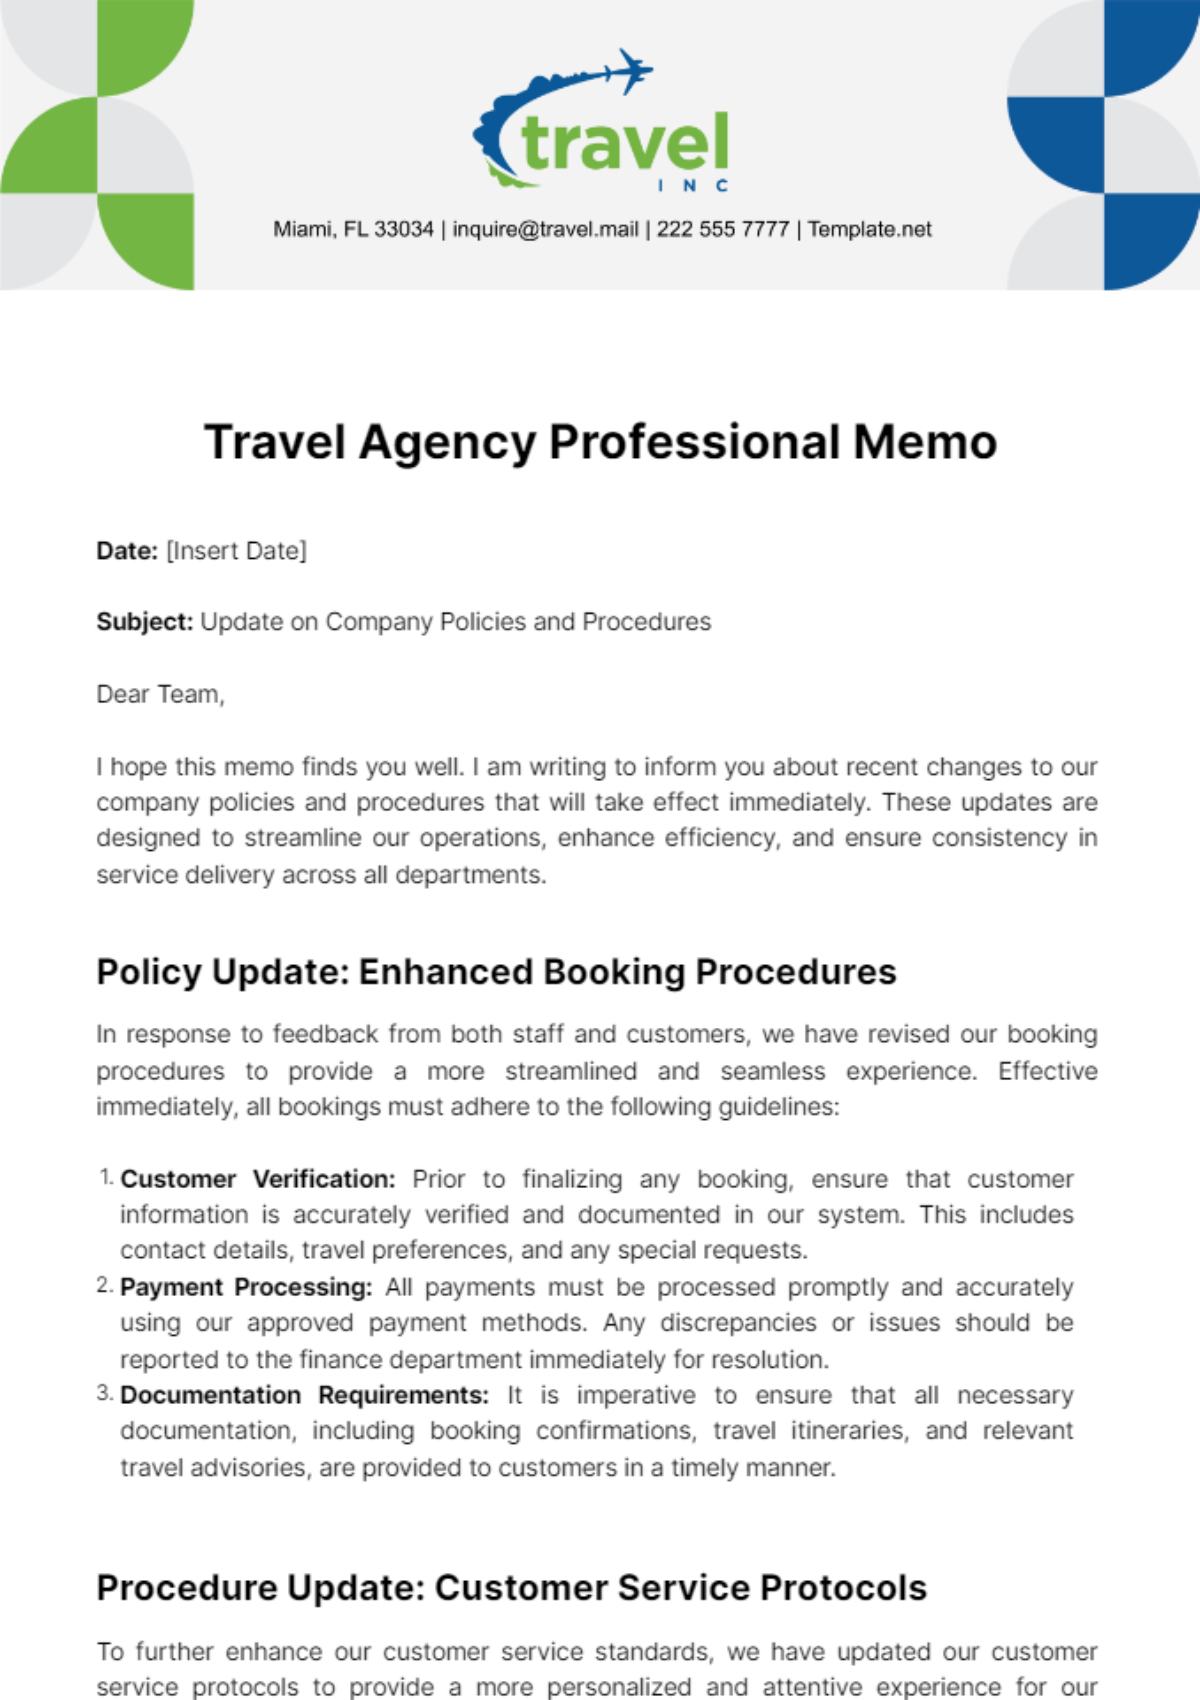 Travel Agency Professional Memo Template